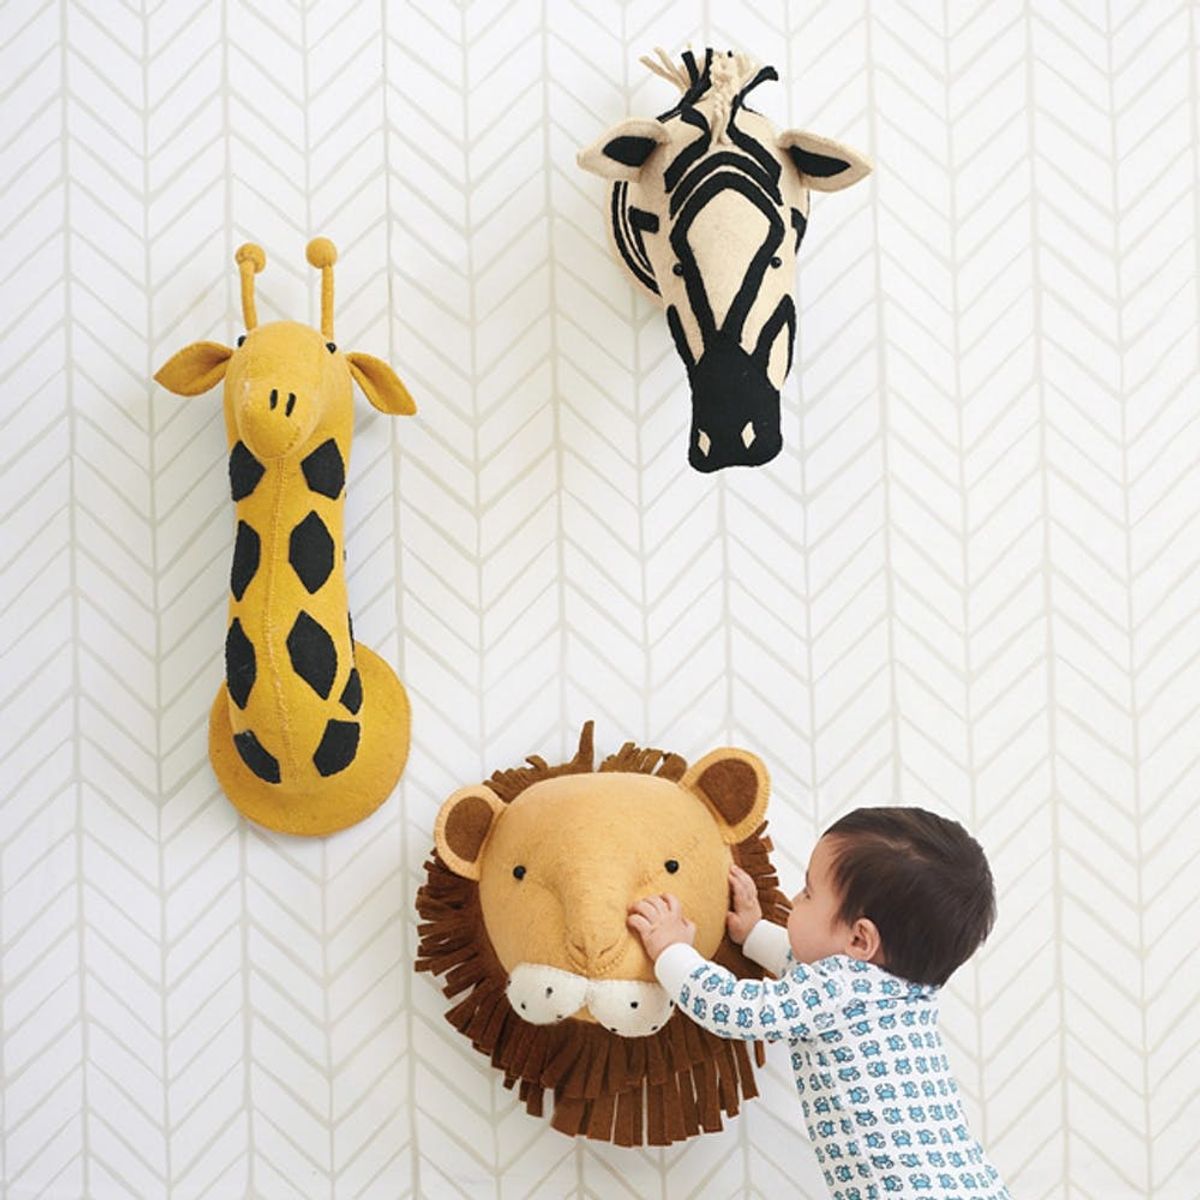 19 Kid-Tested + Mother-Approved Wall Decorations